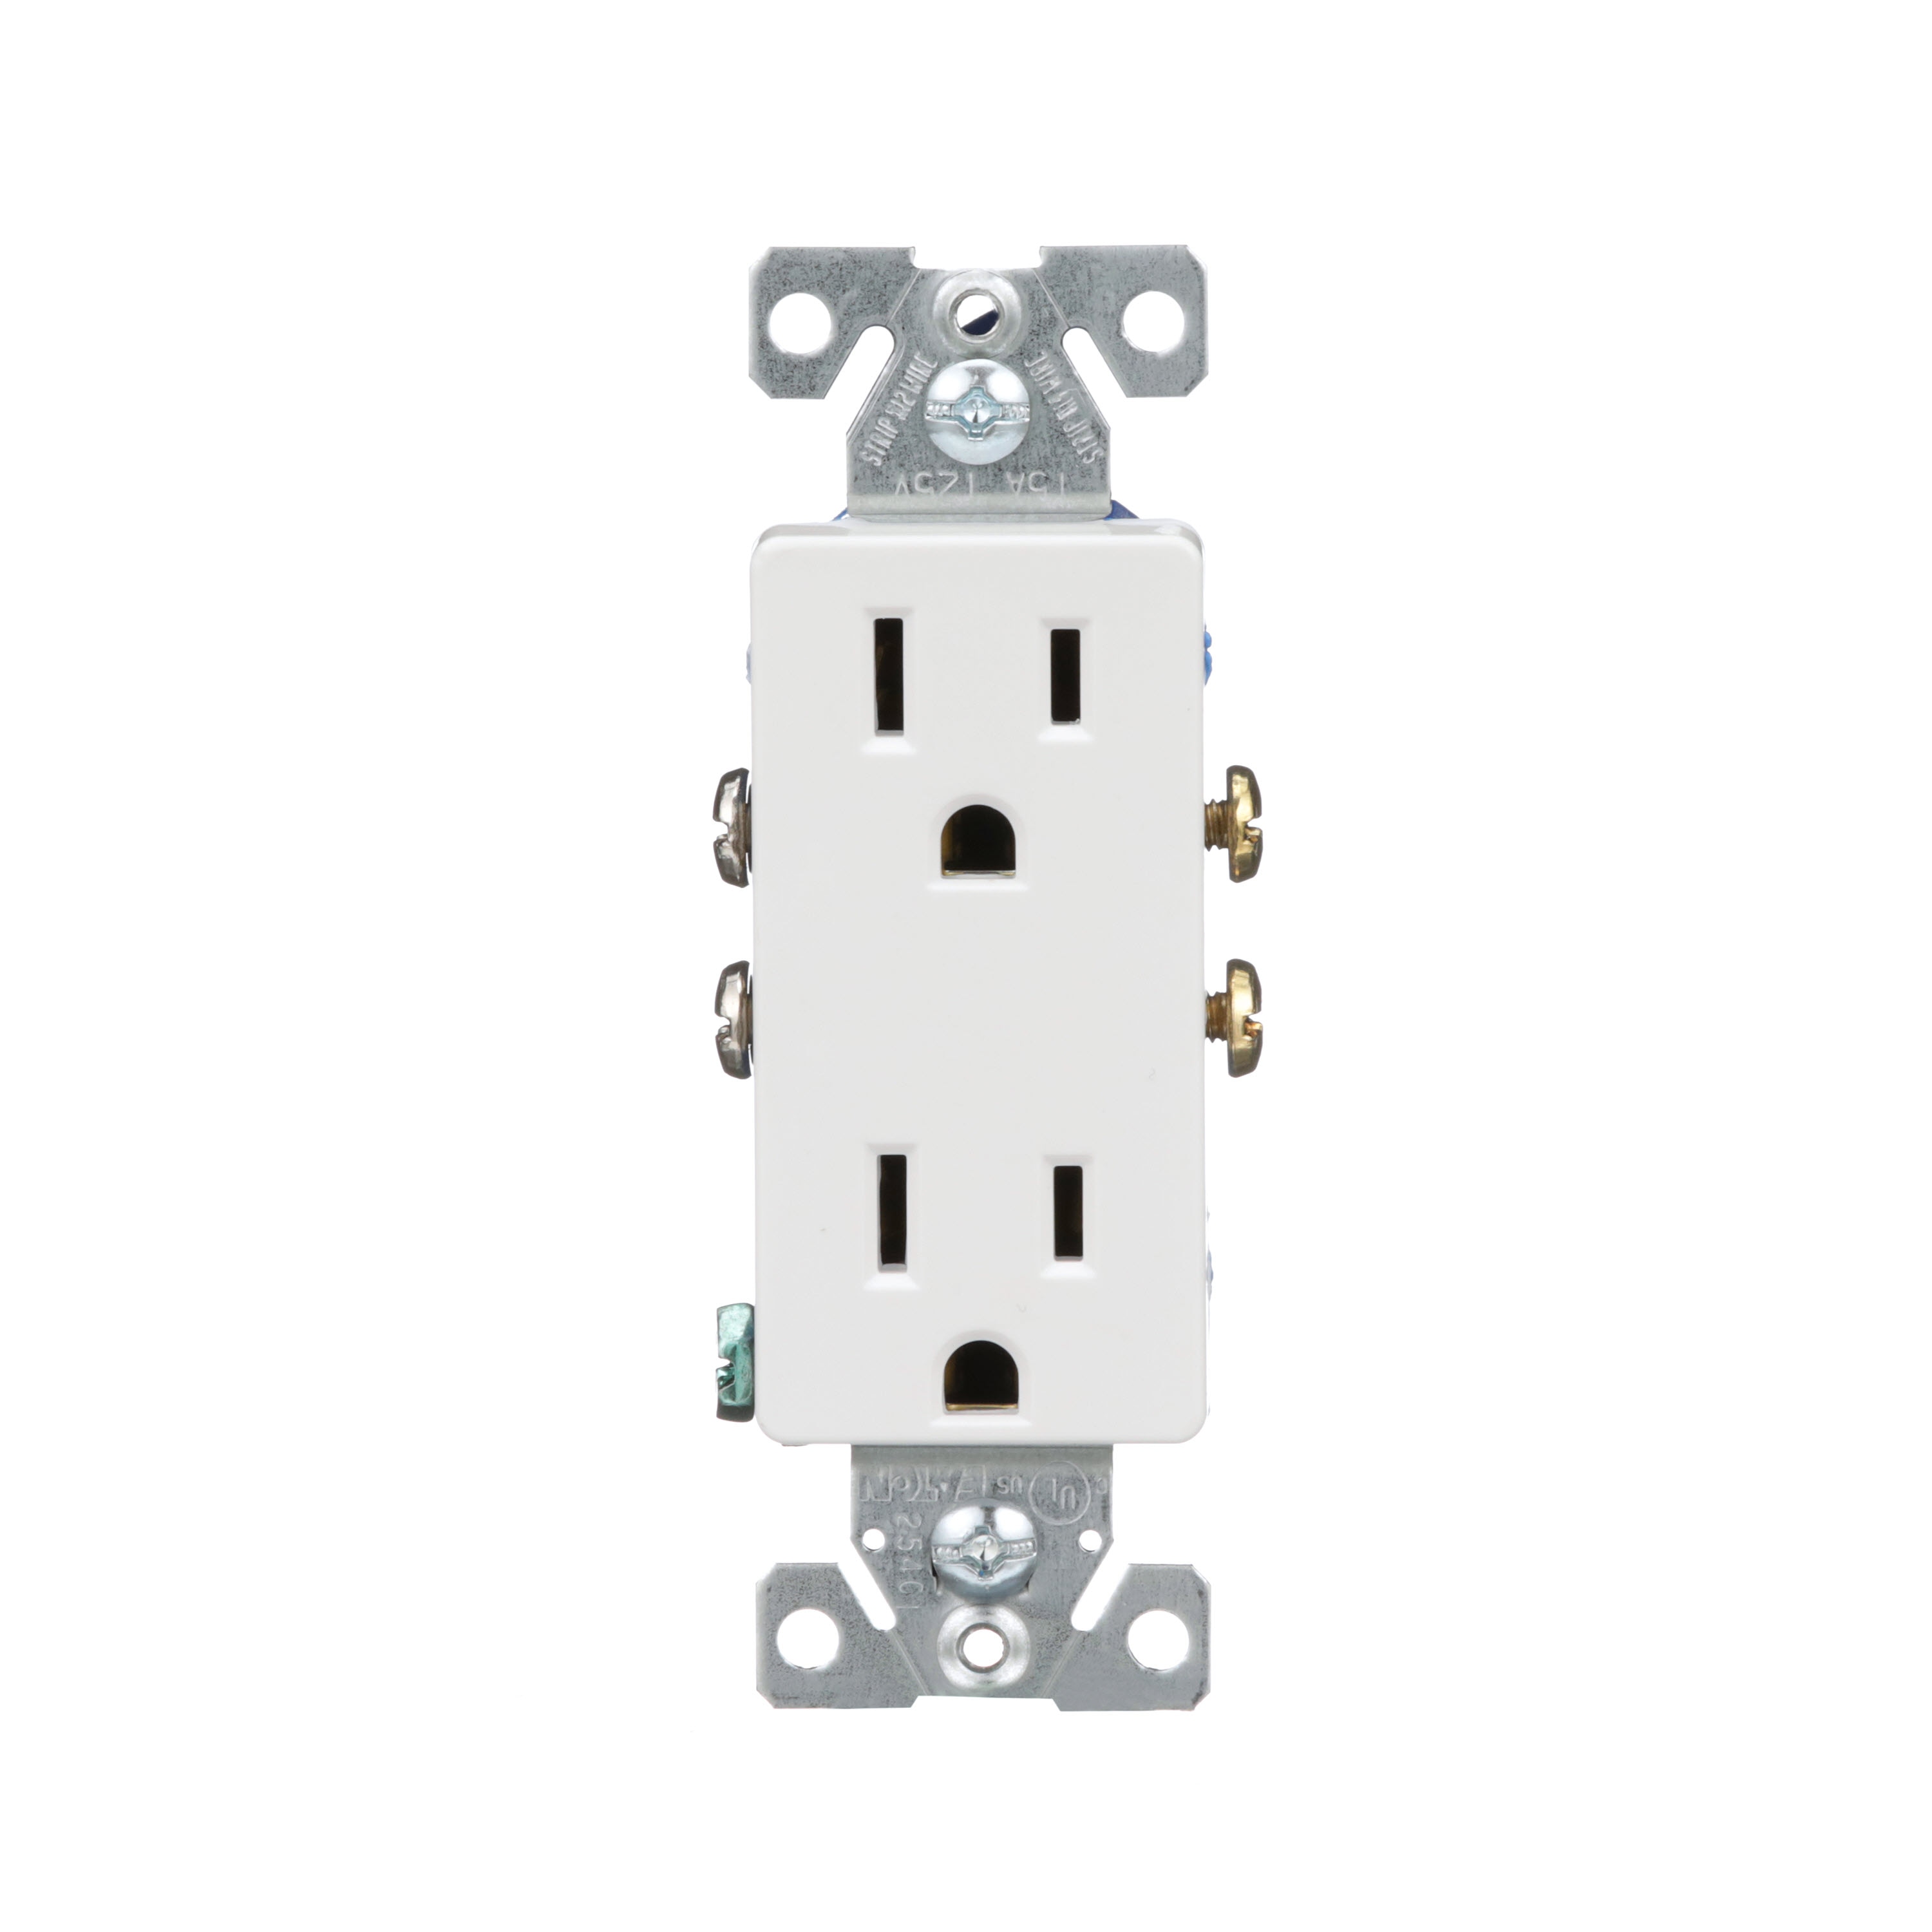 Leviton 15 Amp Decora Tamper-Resistant Duplex Outlet with Type A